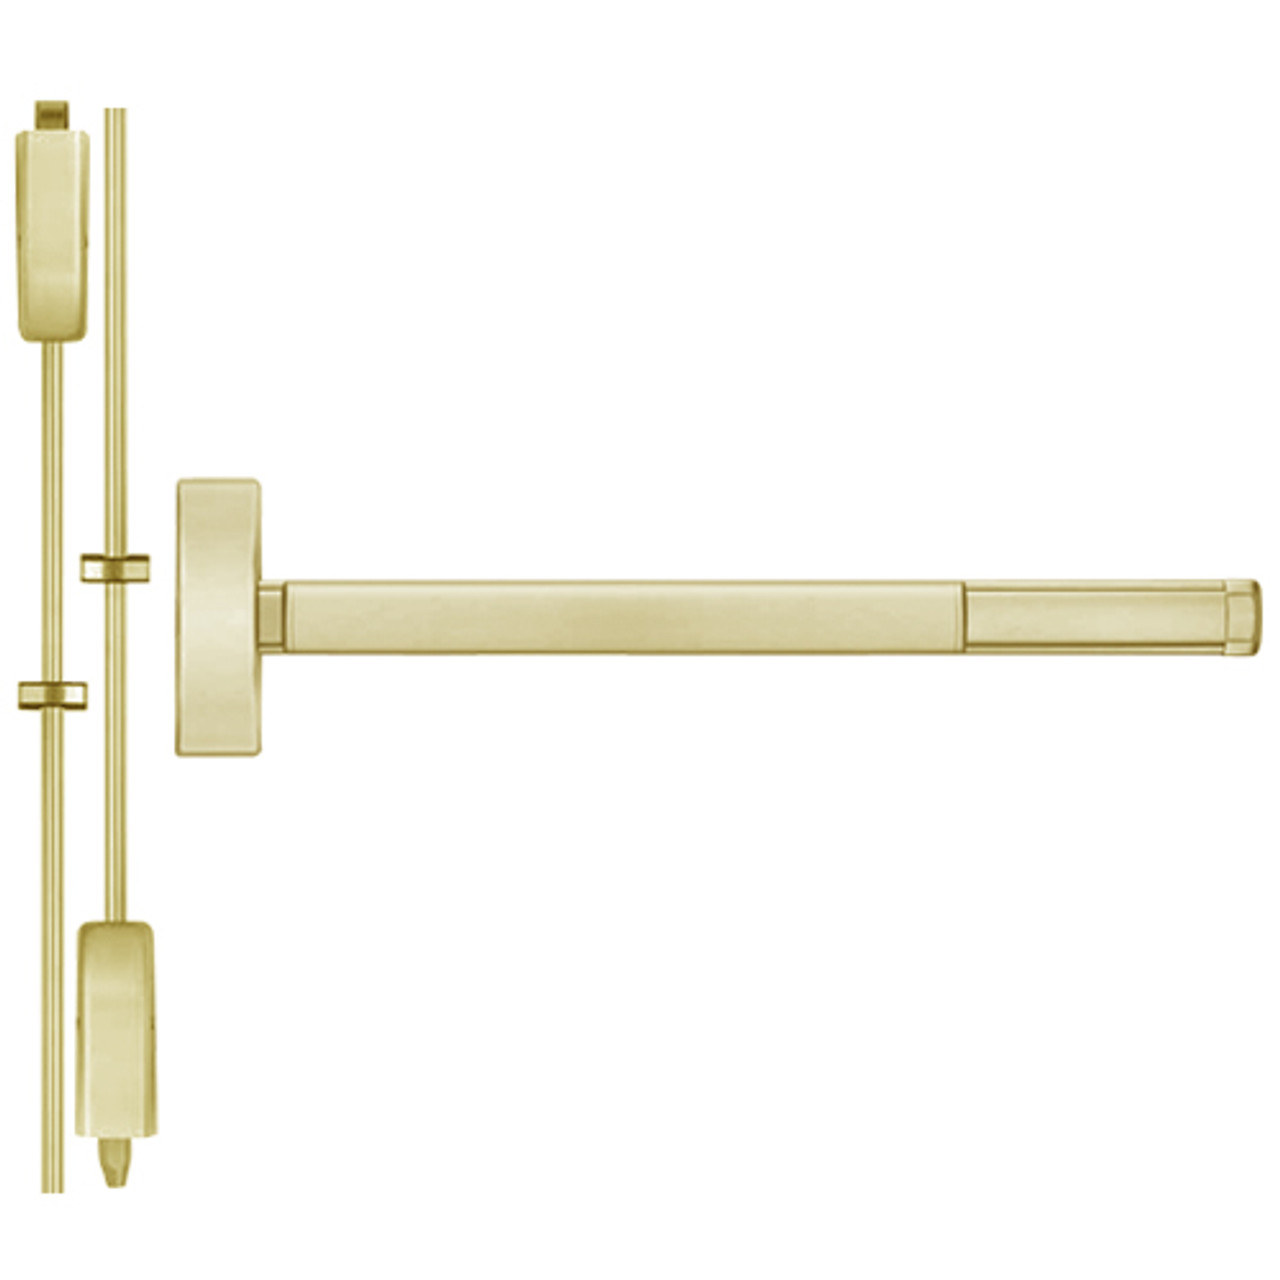 TS2208LBR-606-36 PHI 2200 Series Non Fire Rated Apex Surface Vertical Rod Device with Touchbar Monitoring Switch Prepped for Key Controls Lever/Knob in Satin Brass Finish